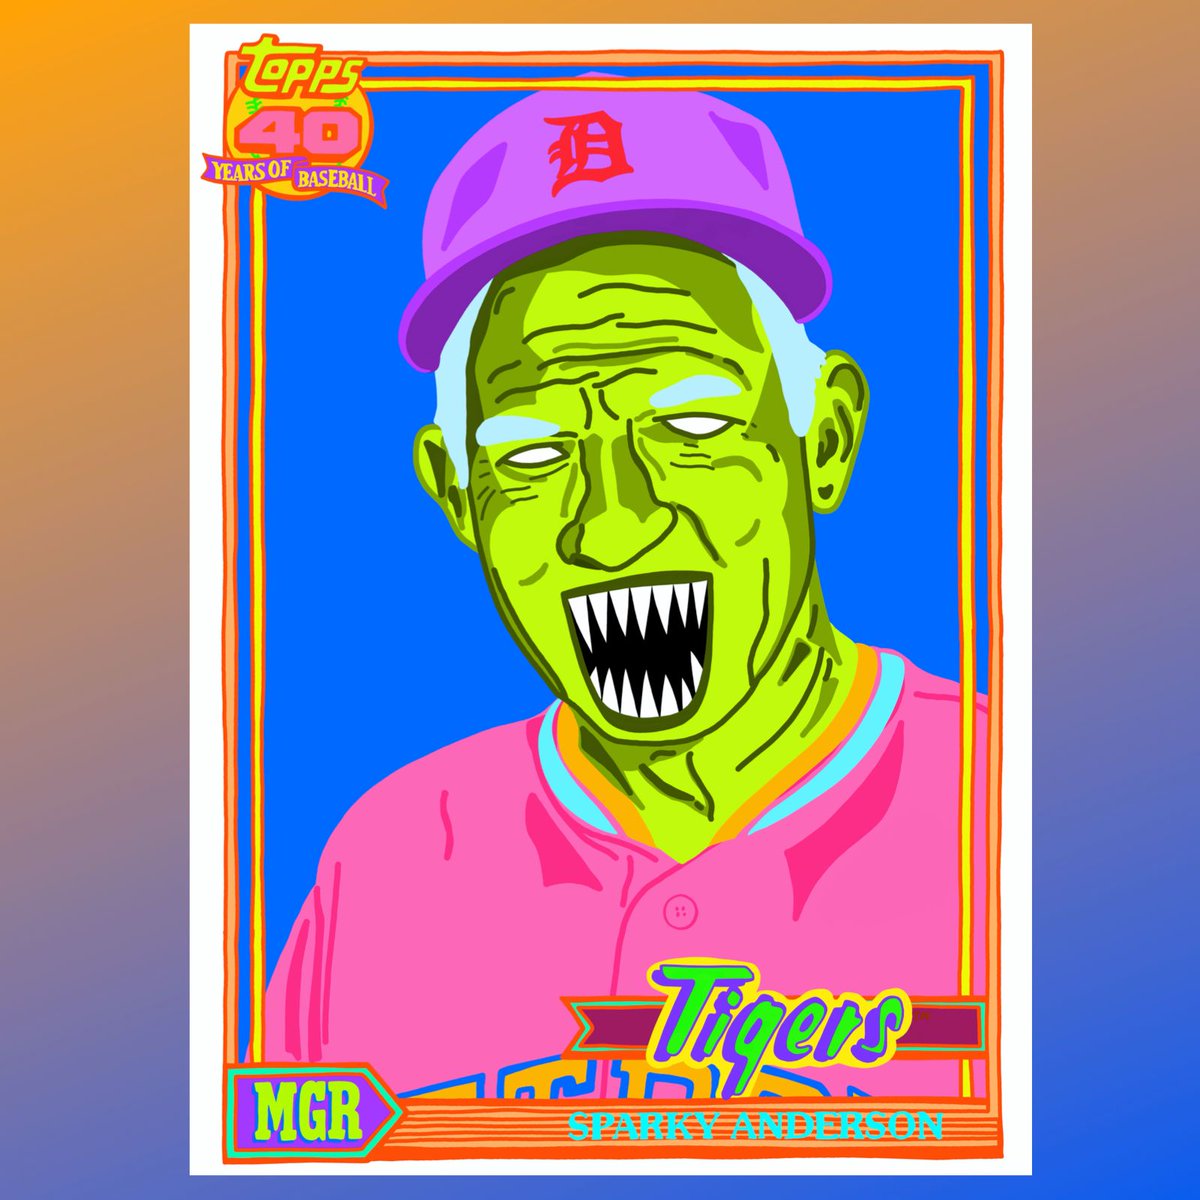 Today's #NeonTerror is #HallofFame manager #SparkyAnderson and his 1991 #Topps card. He played for the #Philadelphia #Phillies in 1959. Went on to me manager of the #Cincinnati #Reds and #Detroit #Tigers. Sparky was a 3x World Series champ and 2x AL Manager of the Year.